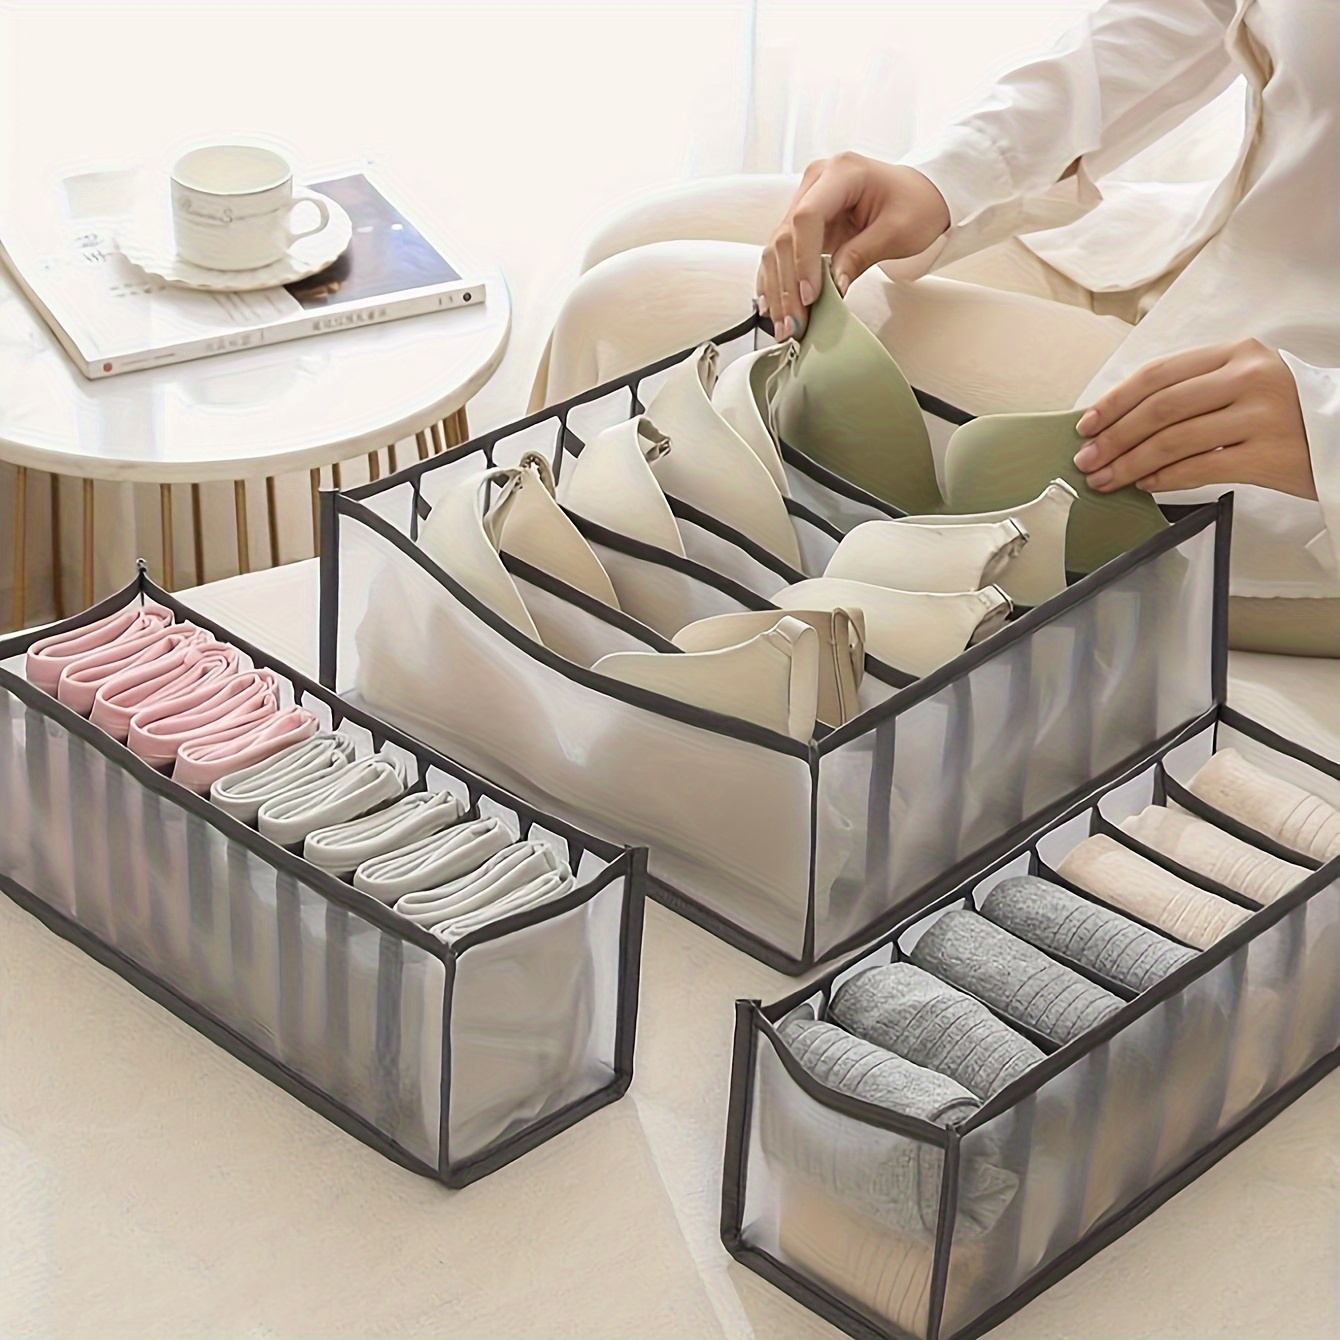 1pc/3pcs Socks And Underwears Organizer ,-6/7/11 Grids Drawer Organizers  For Closet Storage, Shop The Latest Trends